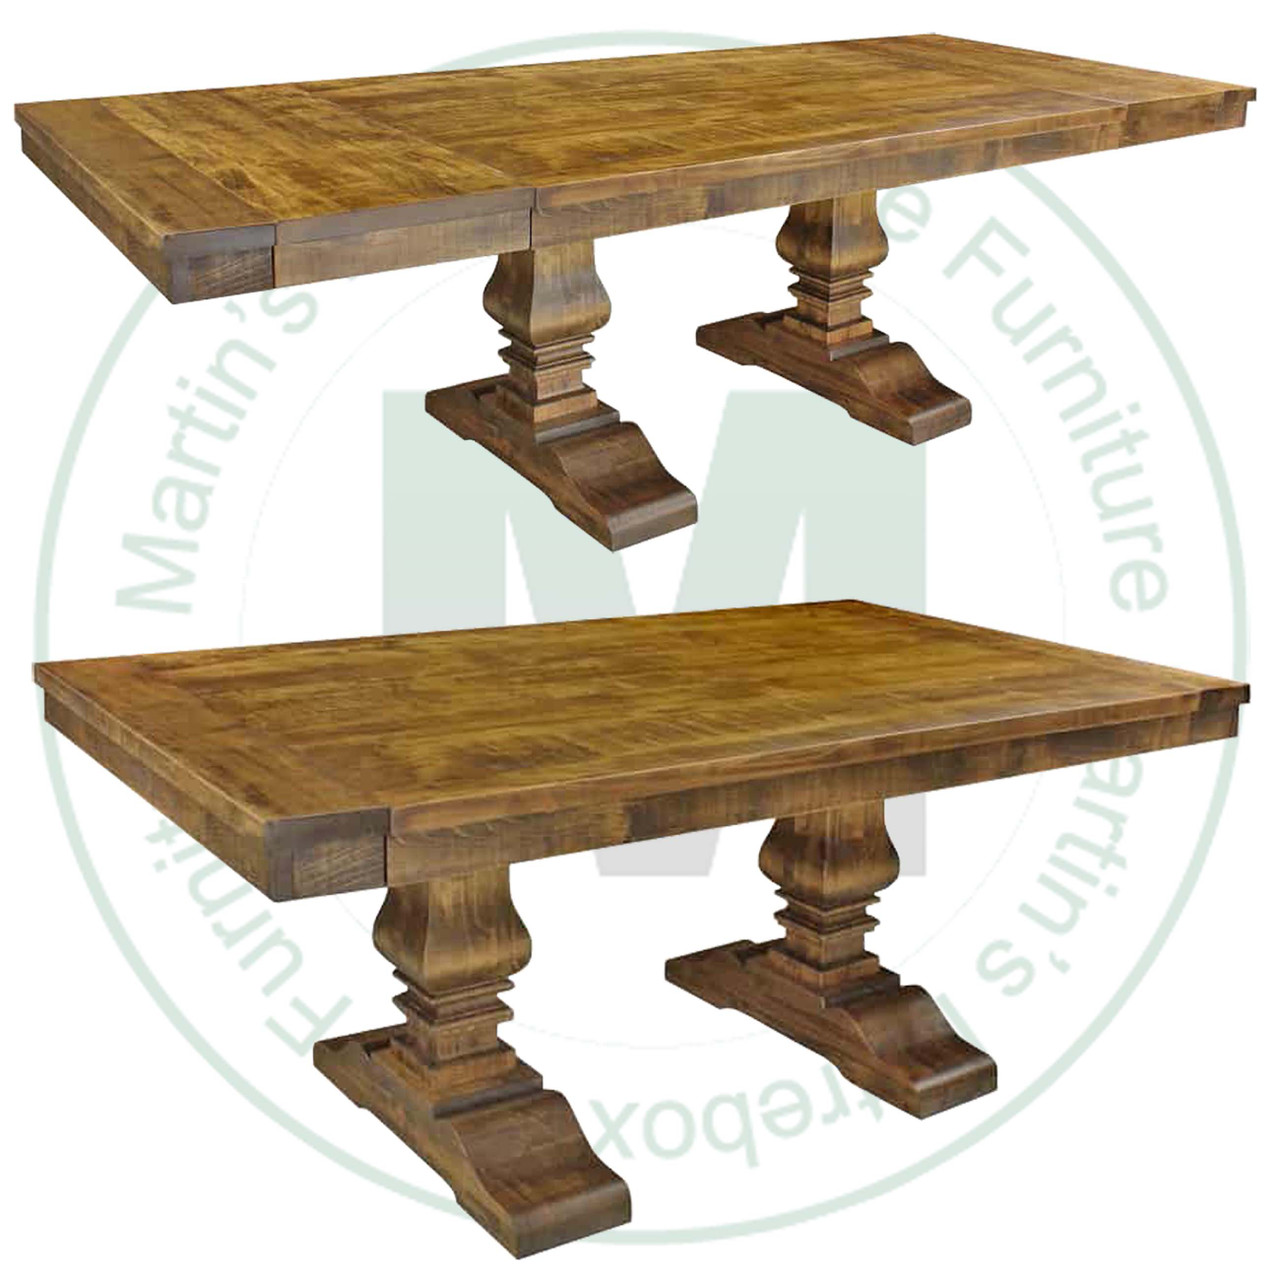 Maple Century Solid Top Double Pedestal Table 48''D x 96''W x 30''H With 2 - 16'' Leaves